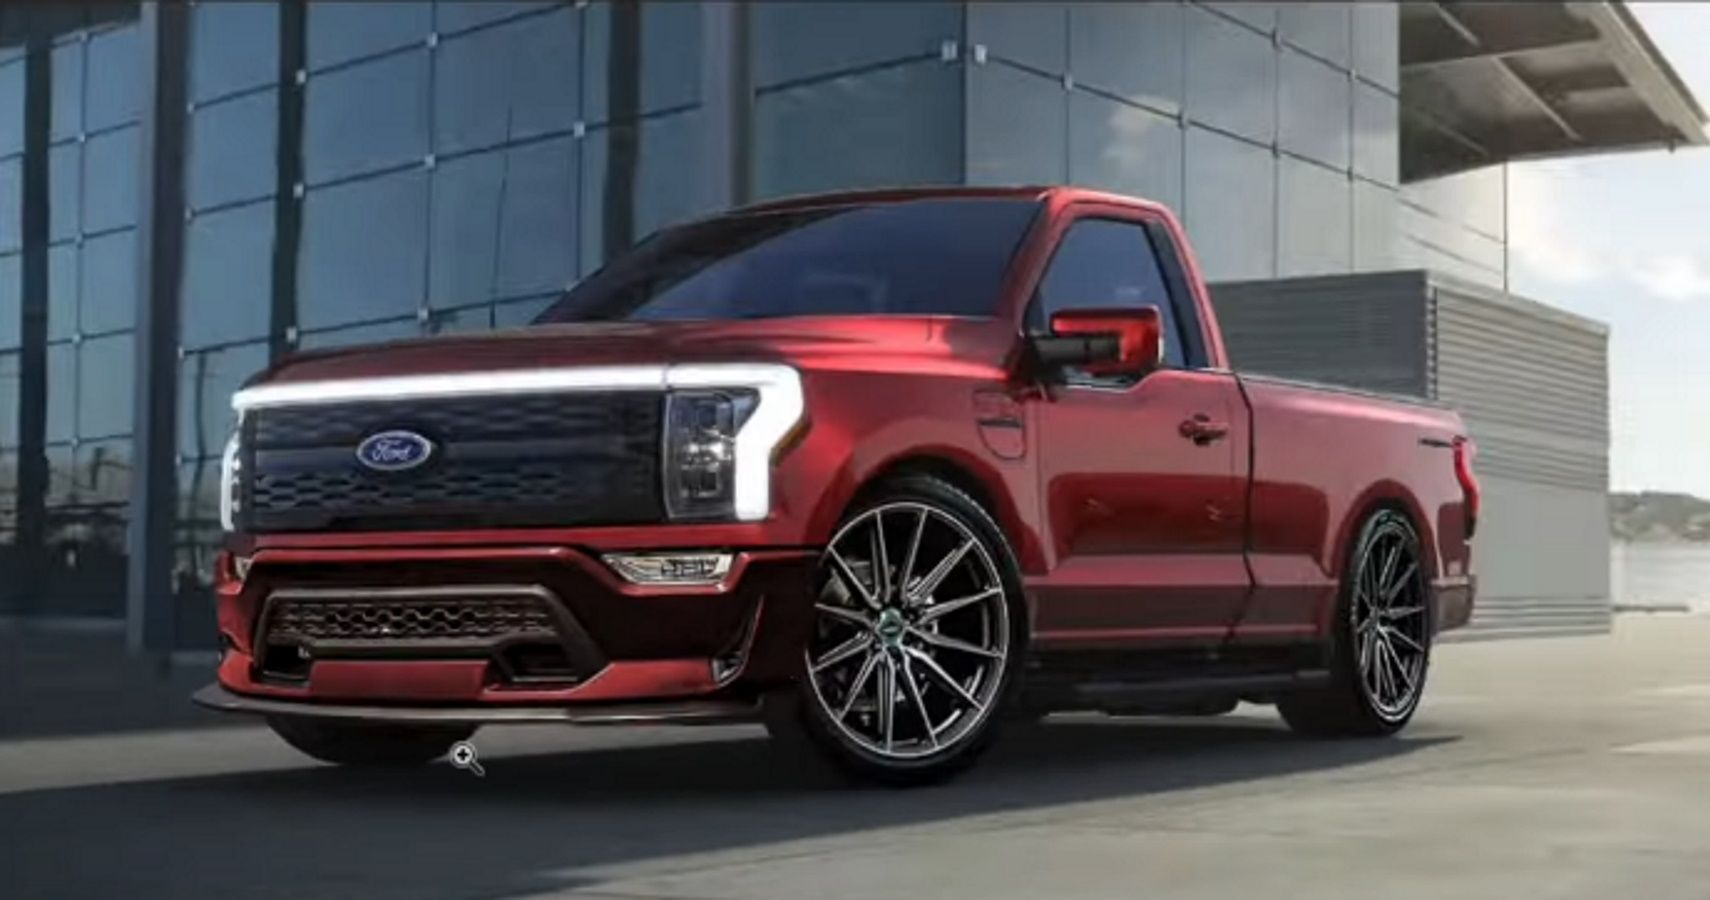 A digital rendering of a two-door Ford F-150 Lightning